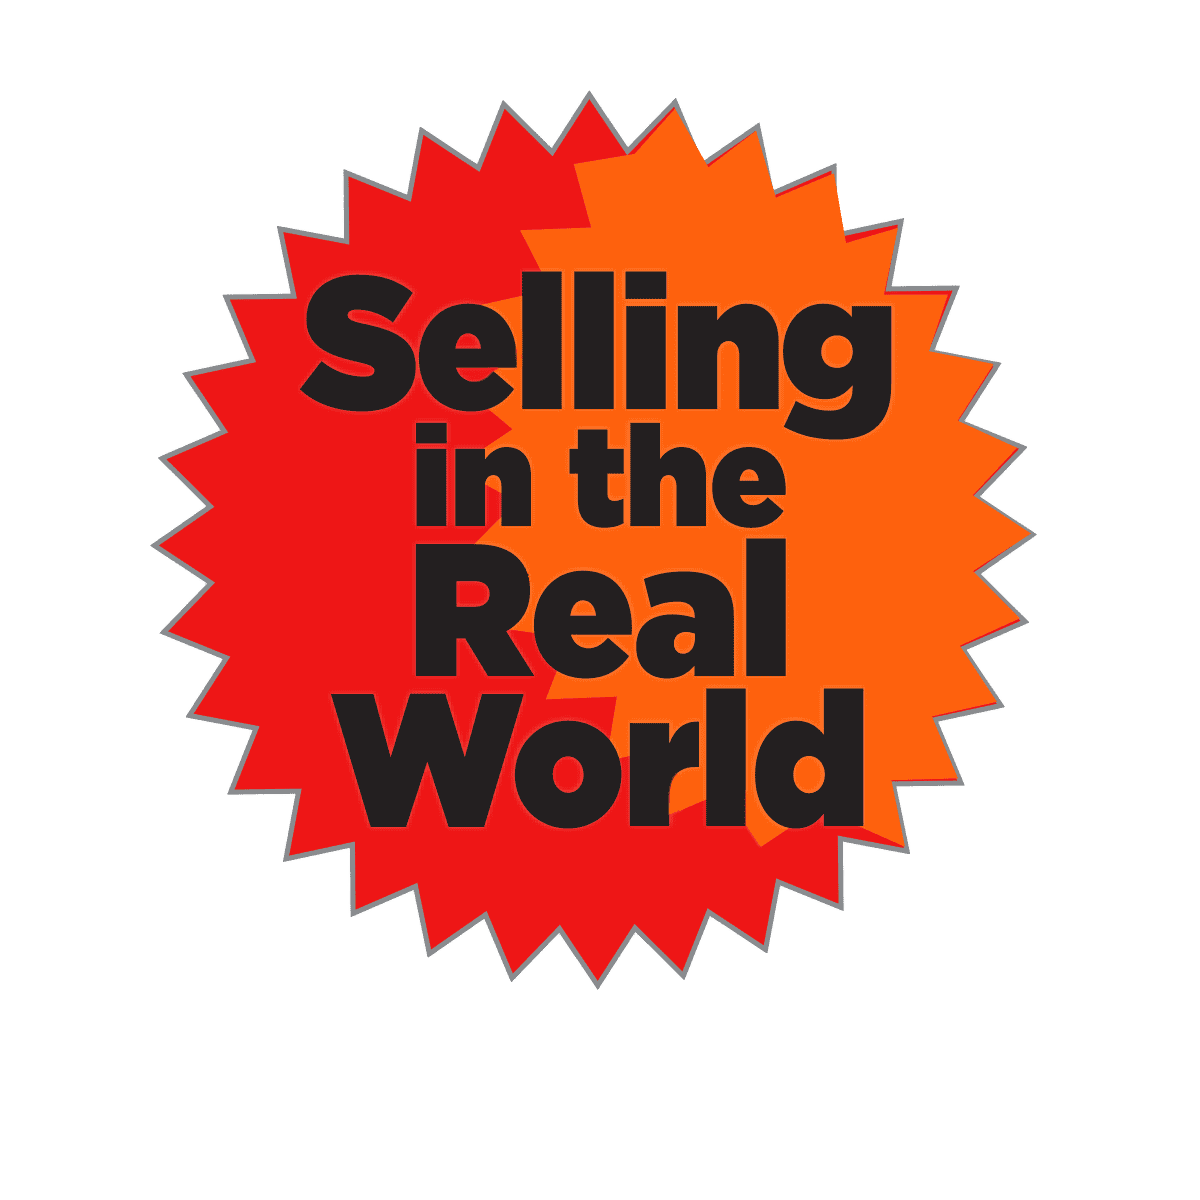  Selling in the Real World